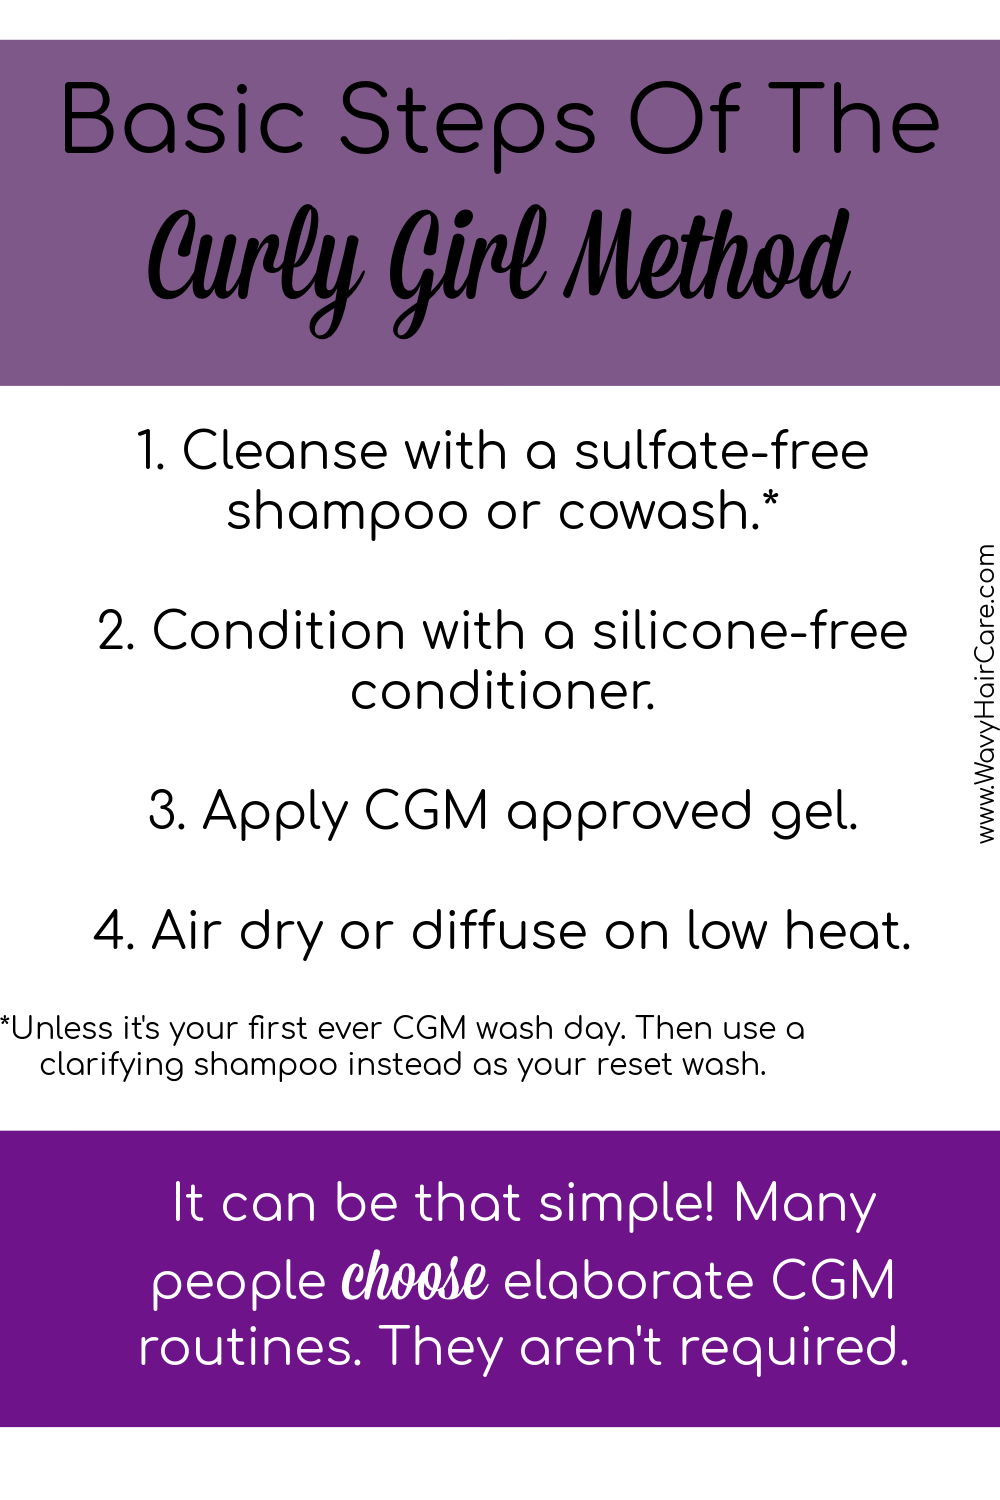 Basic steps of the curly girl method. The CGM really isn't inherently complex, some people just enjoy elaborate routes! If you want to keep it simple, you can. 